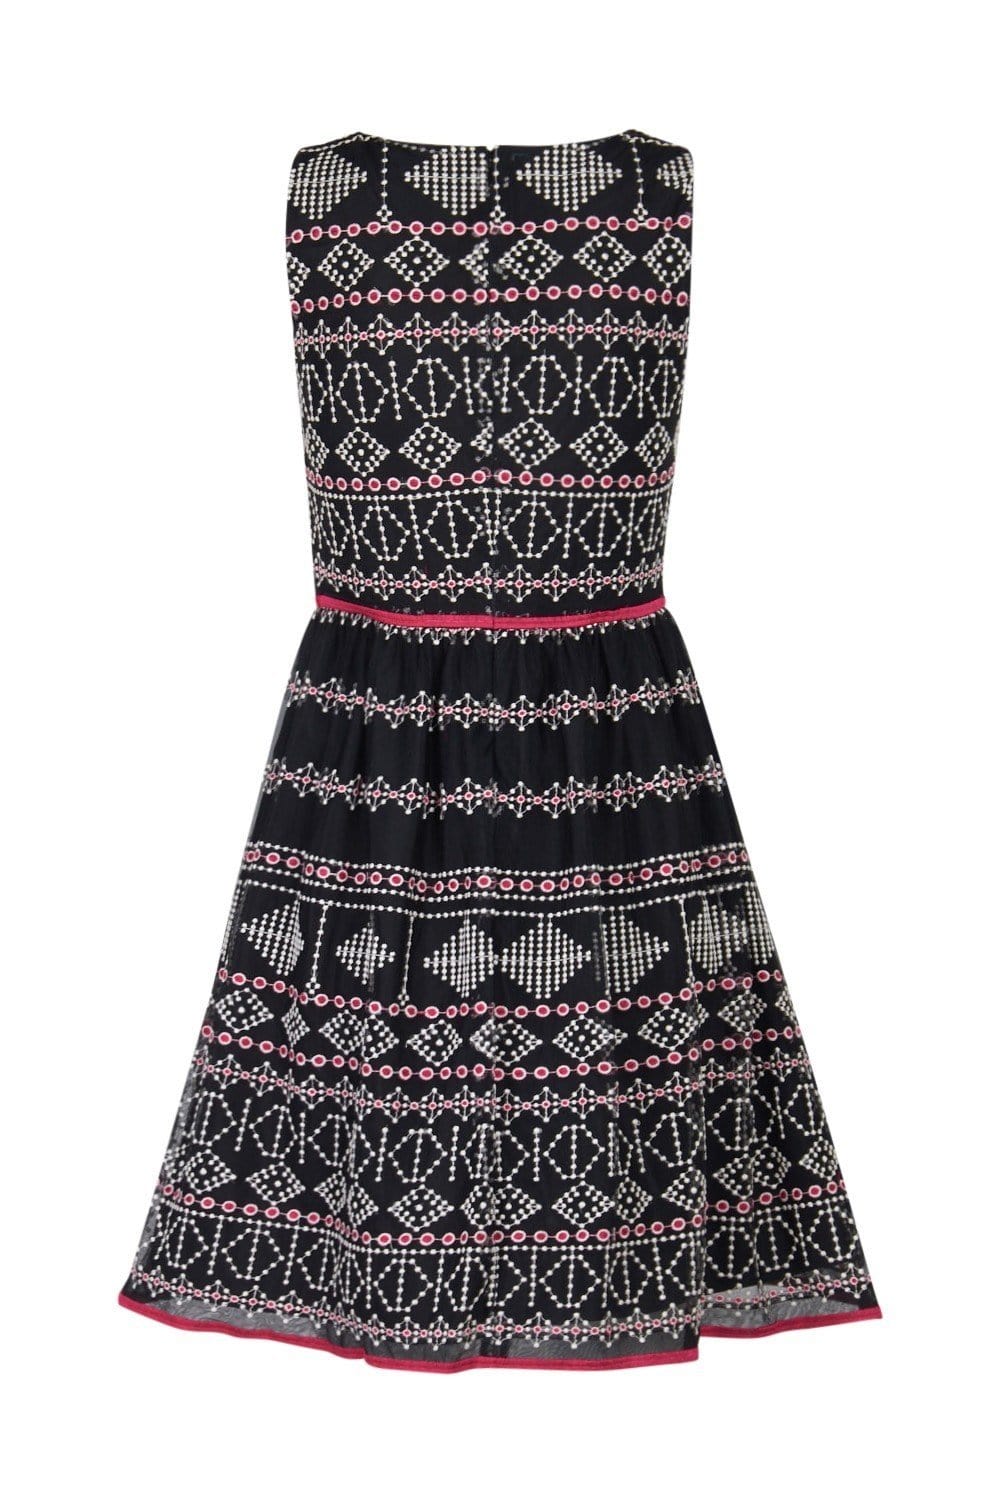 Taylor - 9722M Sleeveless Piped Multi-Print A-Line Dress In Black